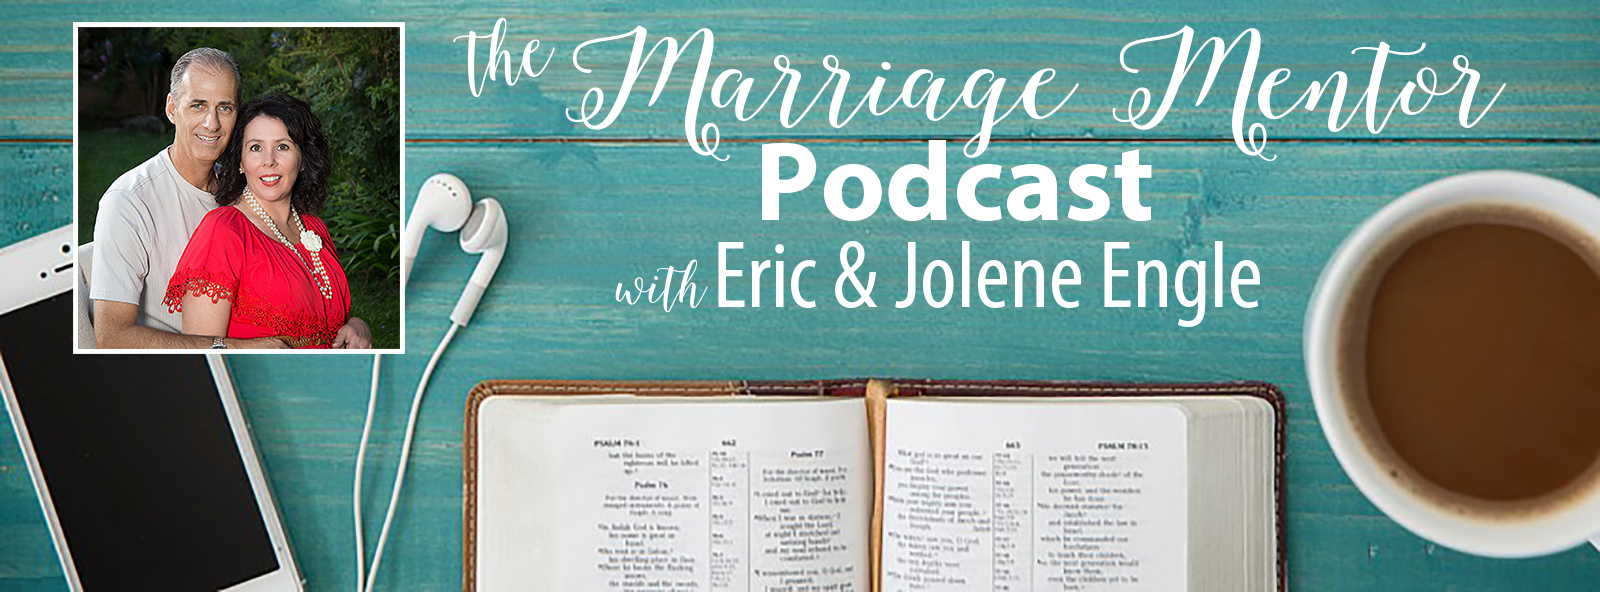 The Marriage Mentor Podcast